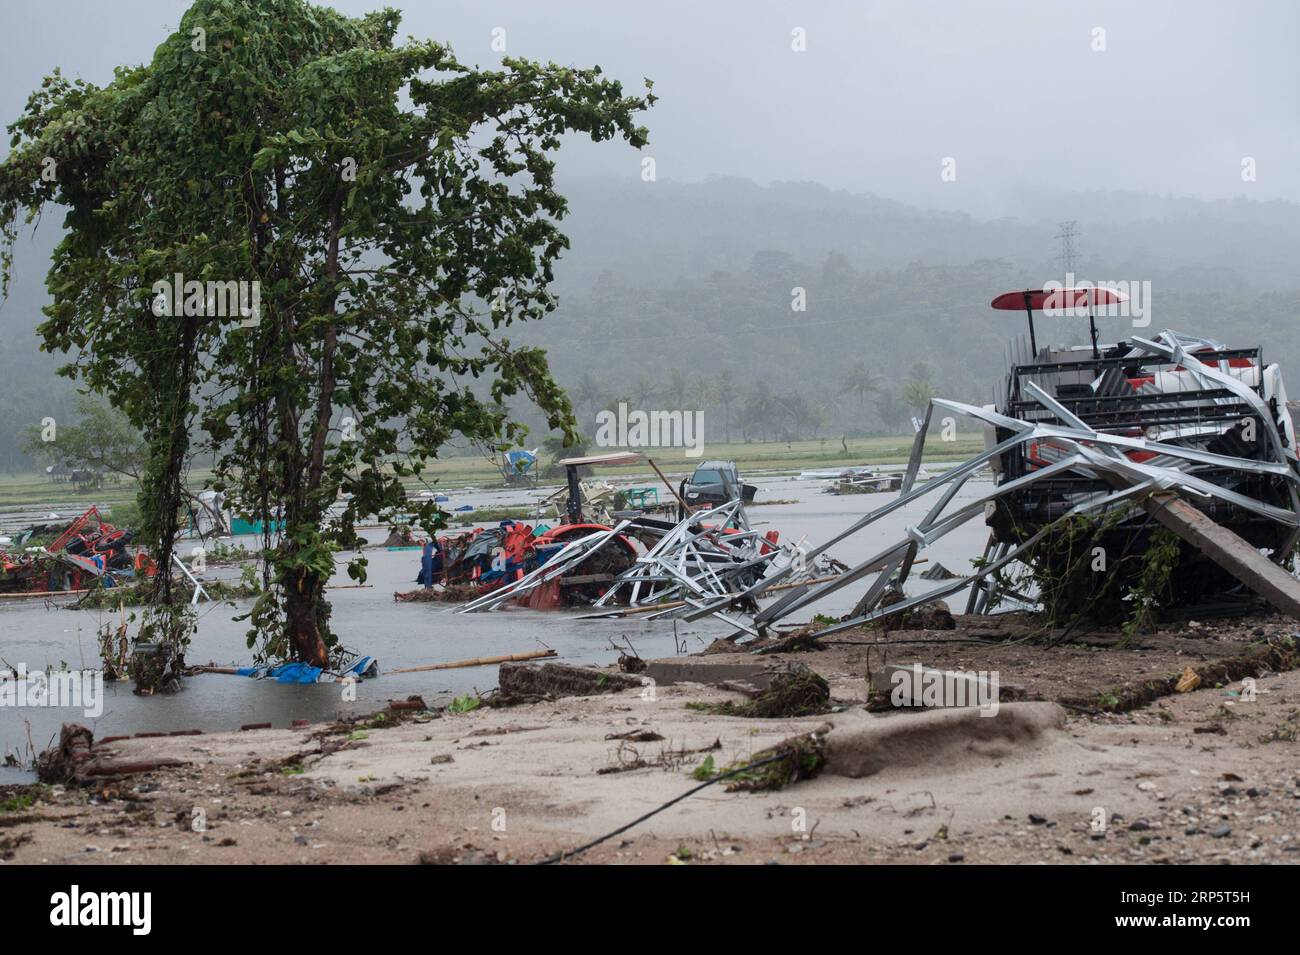 (181223) -- PANDEGLANG, Dec. 23, 2018 -- Cars and tractors are seen among the debris after a tsunami hit Sunda Strait in Pandeglang, Banten province, in Indonesia, Dec. 23, 2018. The total casualty of a tsunami triggered by the eruption of Krakatau Child volcano has increased to 168 people in coastal areas of Sunda Strait of western Indonesia, disaster agency official said here on Sunday. The catastrophe killed at least 168 people, wounded at least 745 ones and collapsed a total of 430 houses and nine hotels, and caused damages to scores of ships. ) INDONESIA-PANDEGLANG-TSUNAMI-AFTERMATH Verix Stock Photo